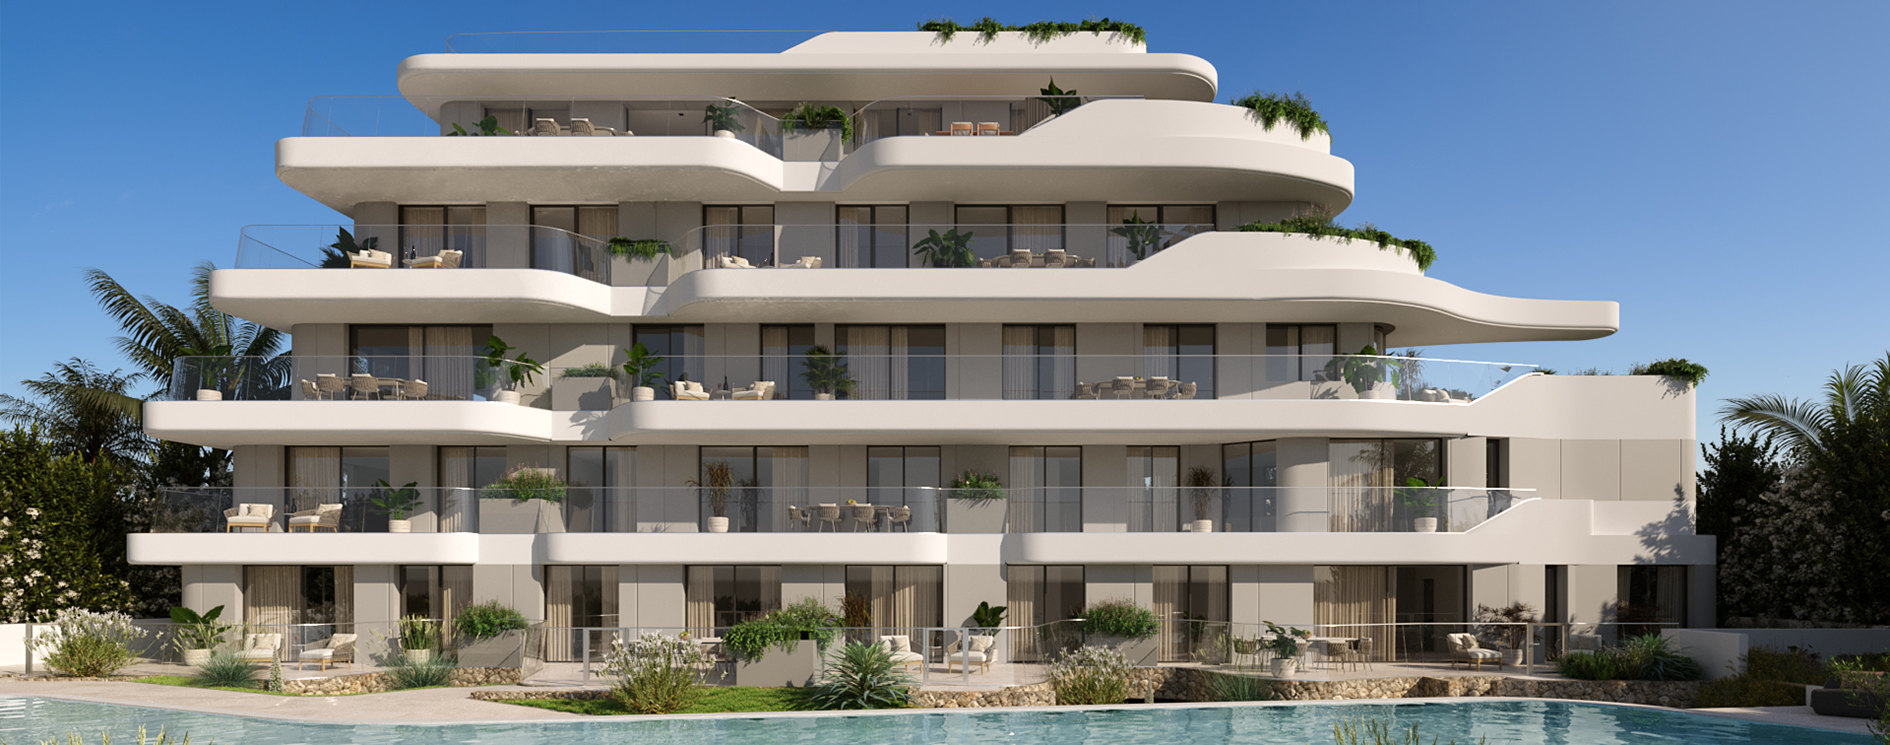 Building permit granted: THE ONE BY ELEMENTS, IBIZA